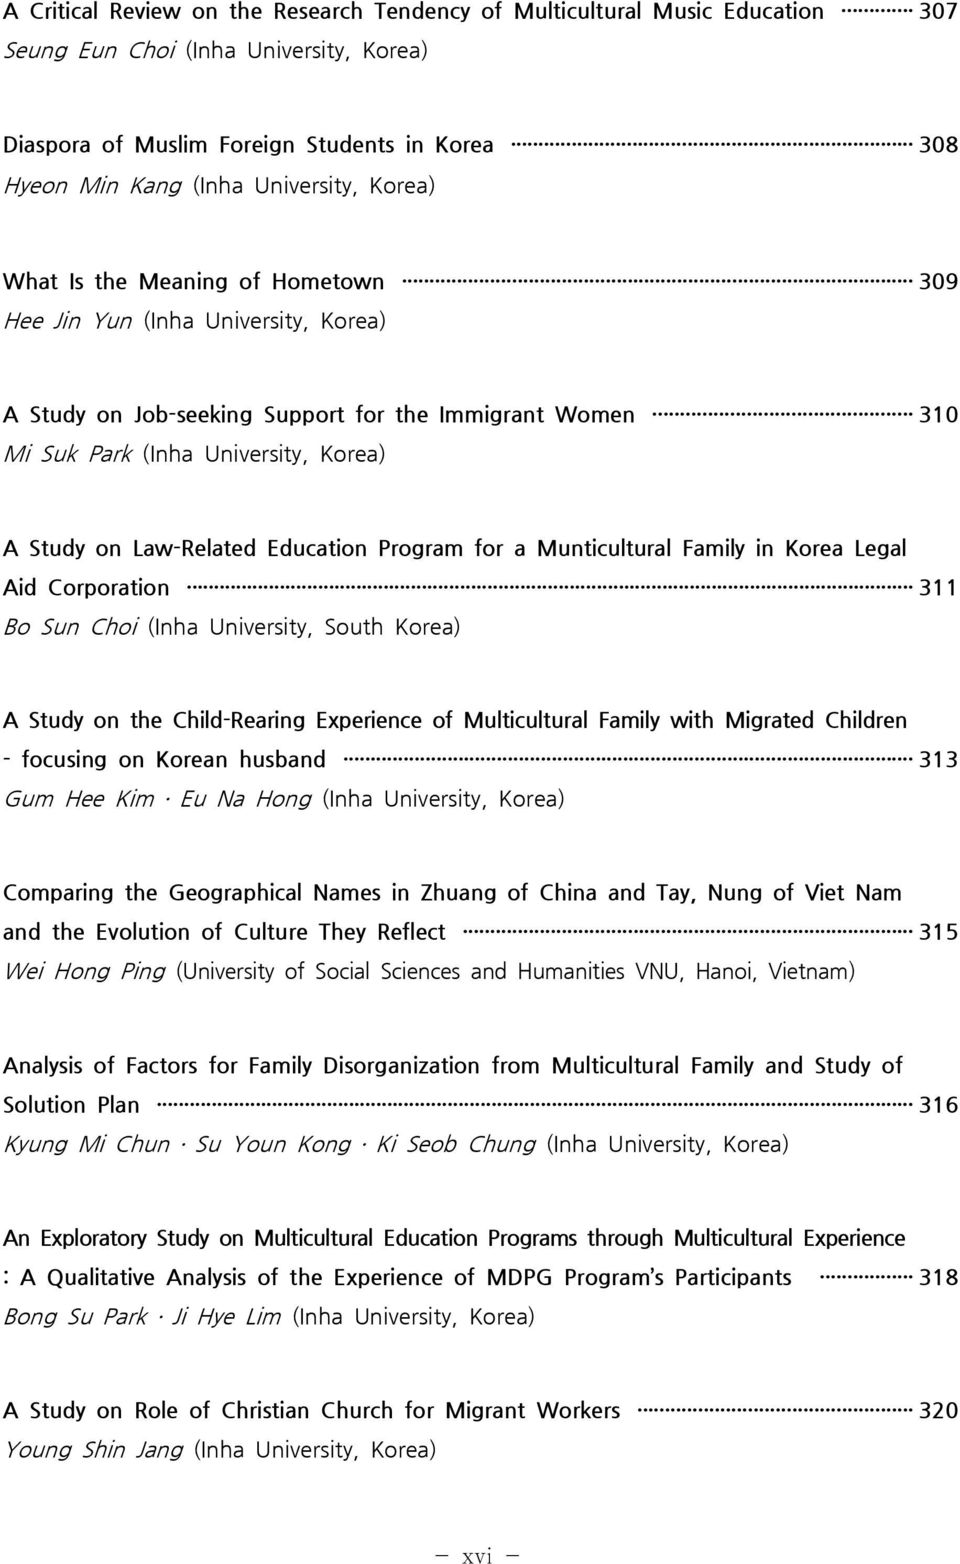 Law-Related Education Program for a Munticultural Family in Korea Legal Aid Corporation 311 Bo Sun Choi (Inha University, South Korea) A Study on the Child-Rearing Experience of Multicultural Family